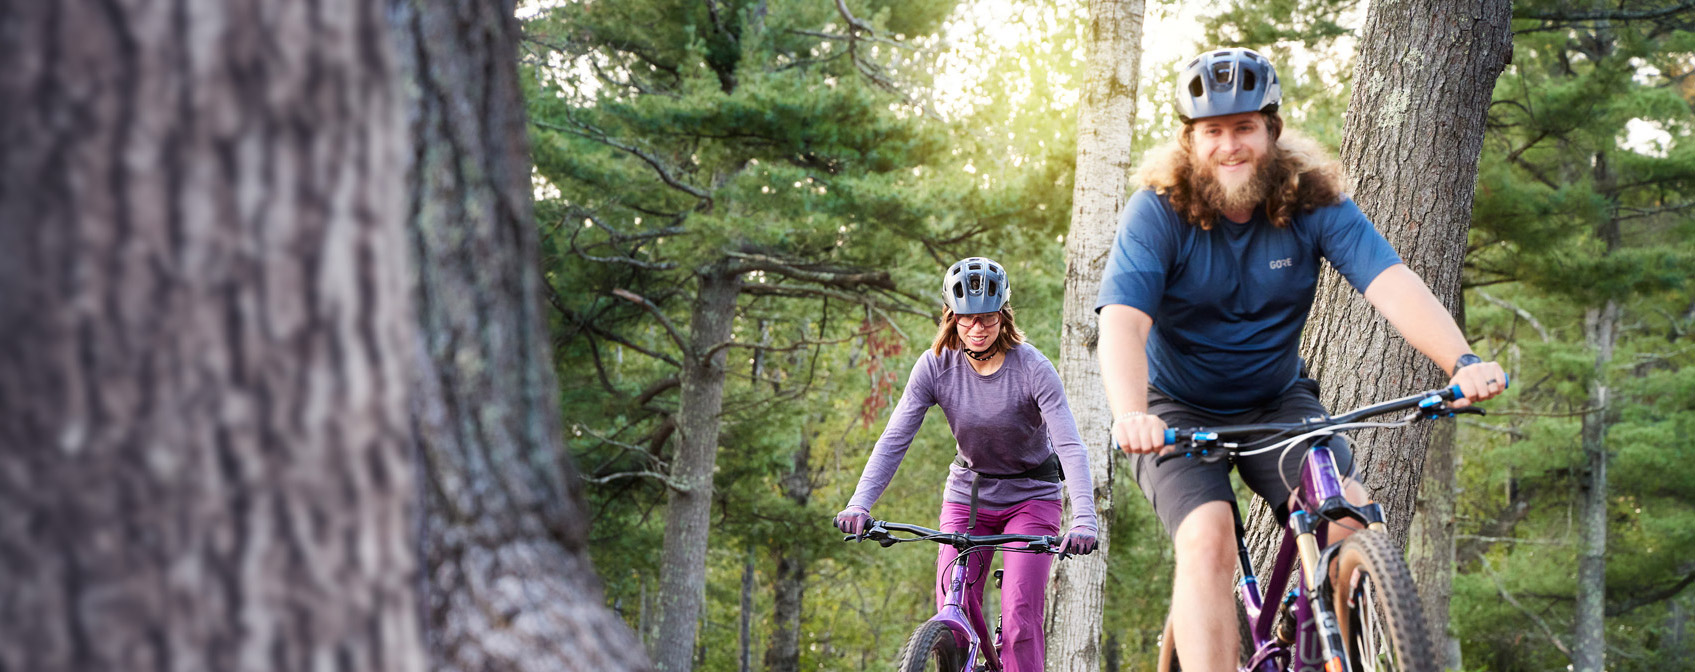 One male and one female mountain biker pedaling through the woods.